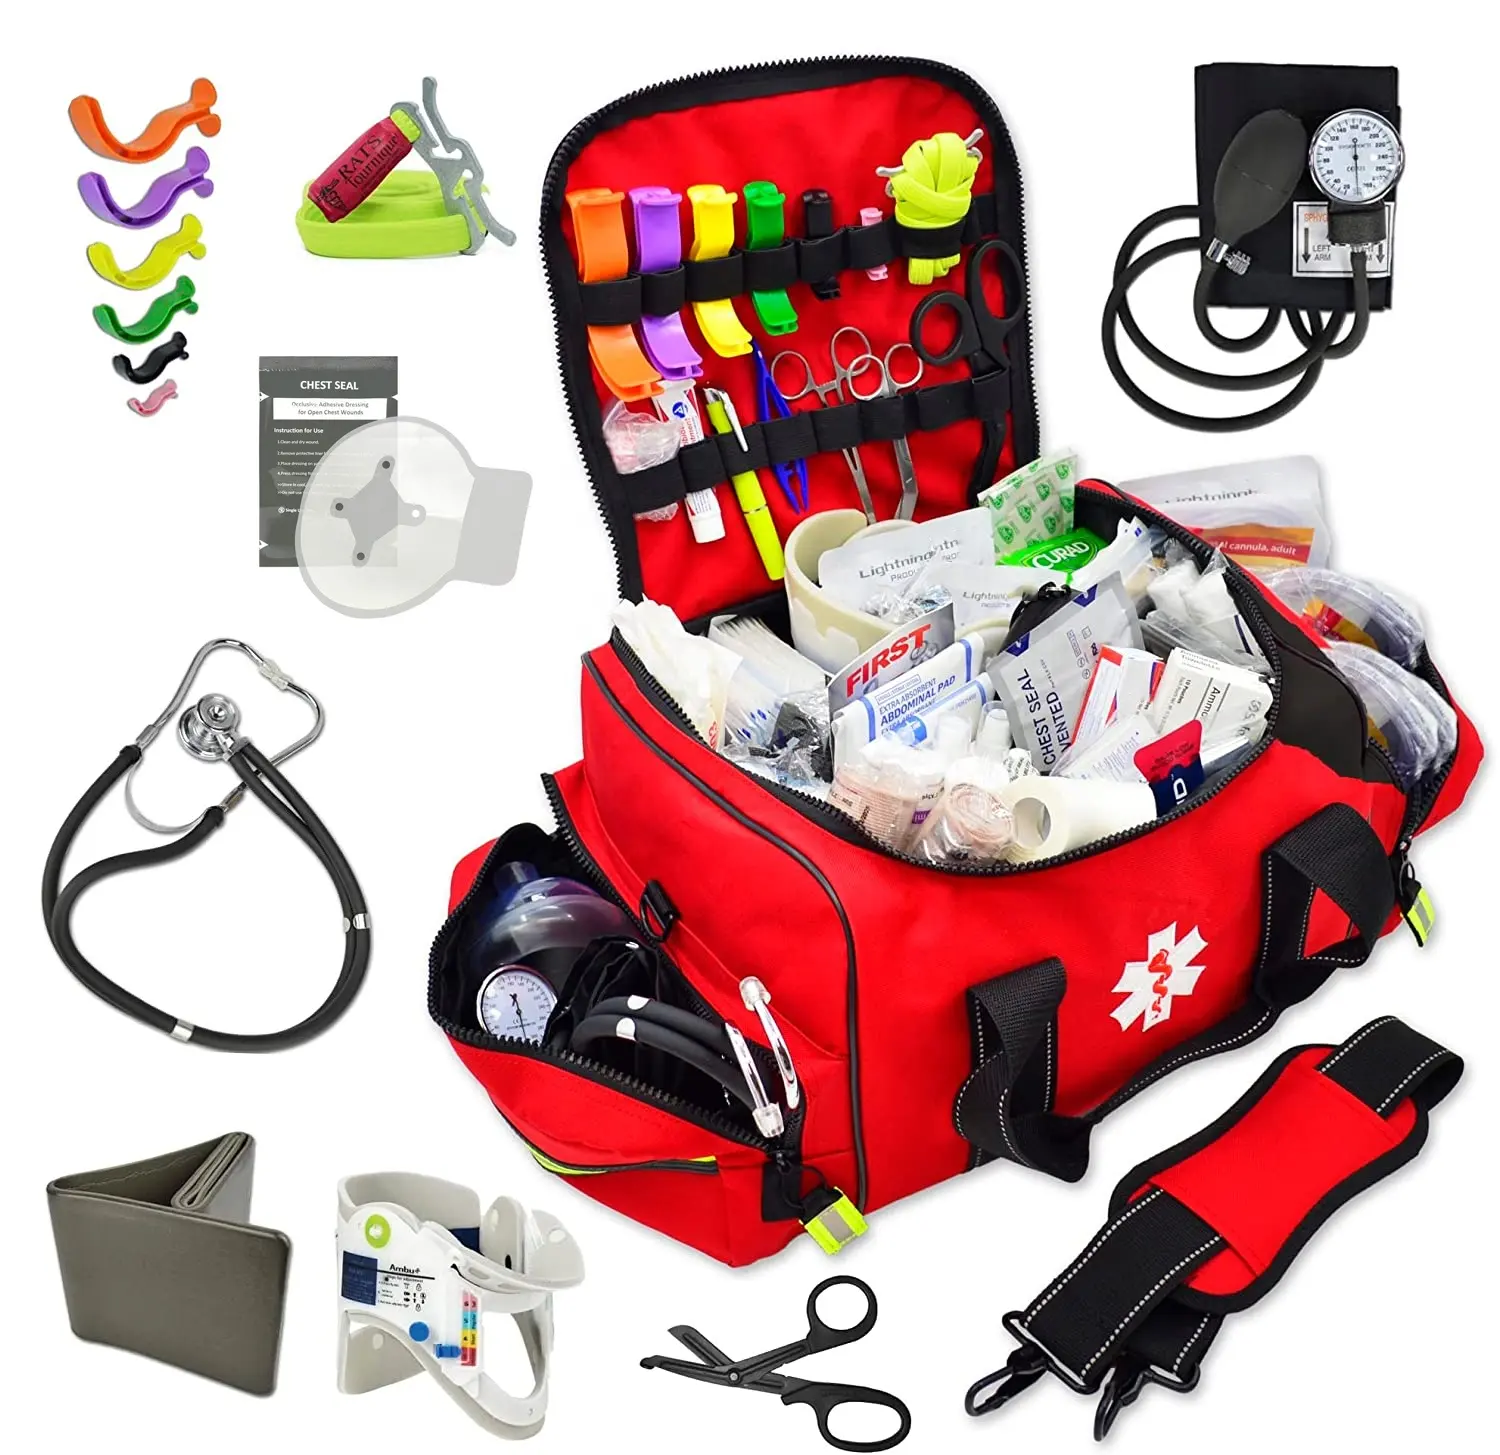 Waterproof And Durable Trauma First Aid Kit For Paramedics Emergency Medical Survival Kit